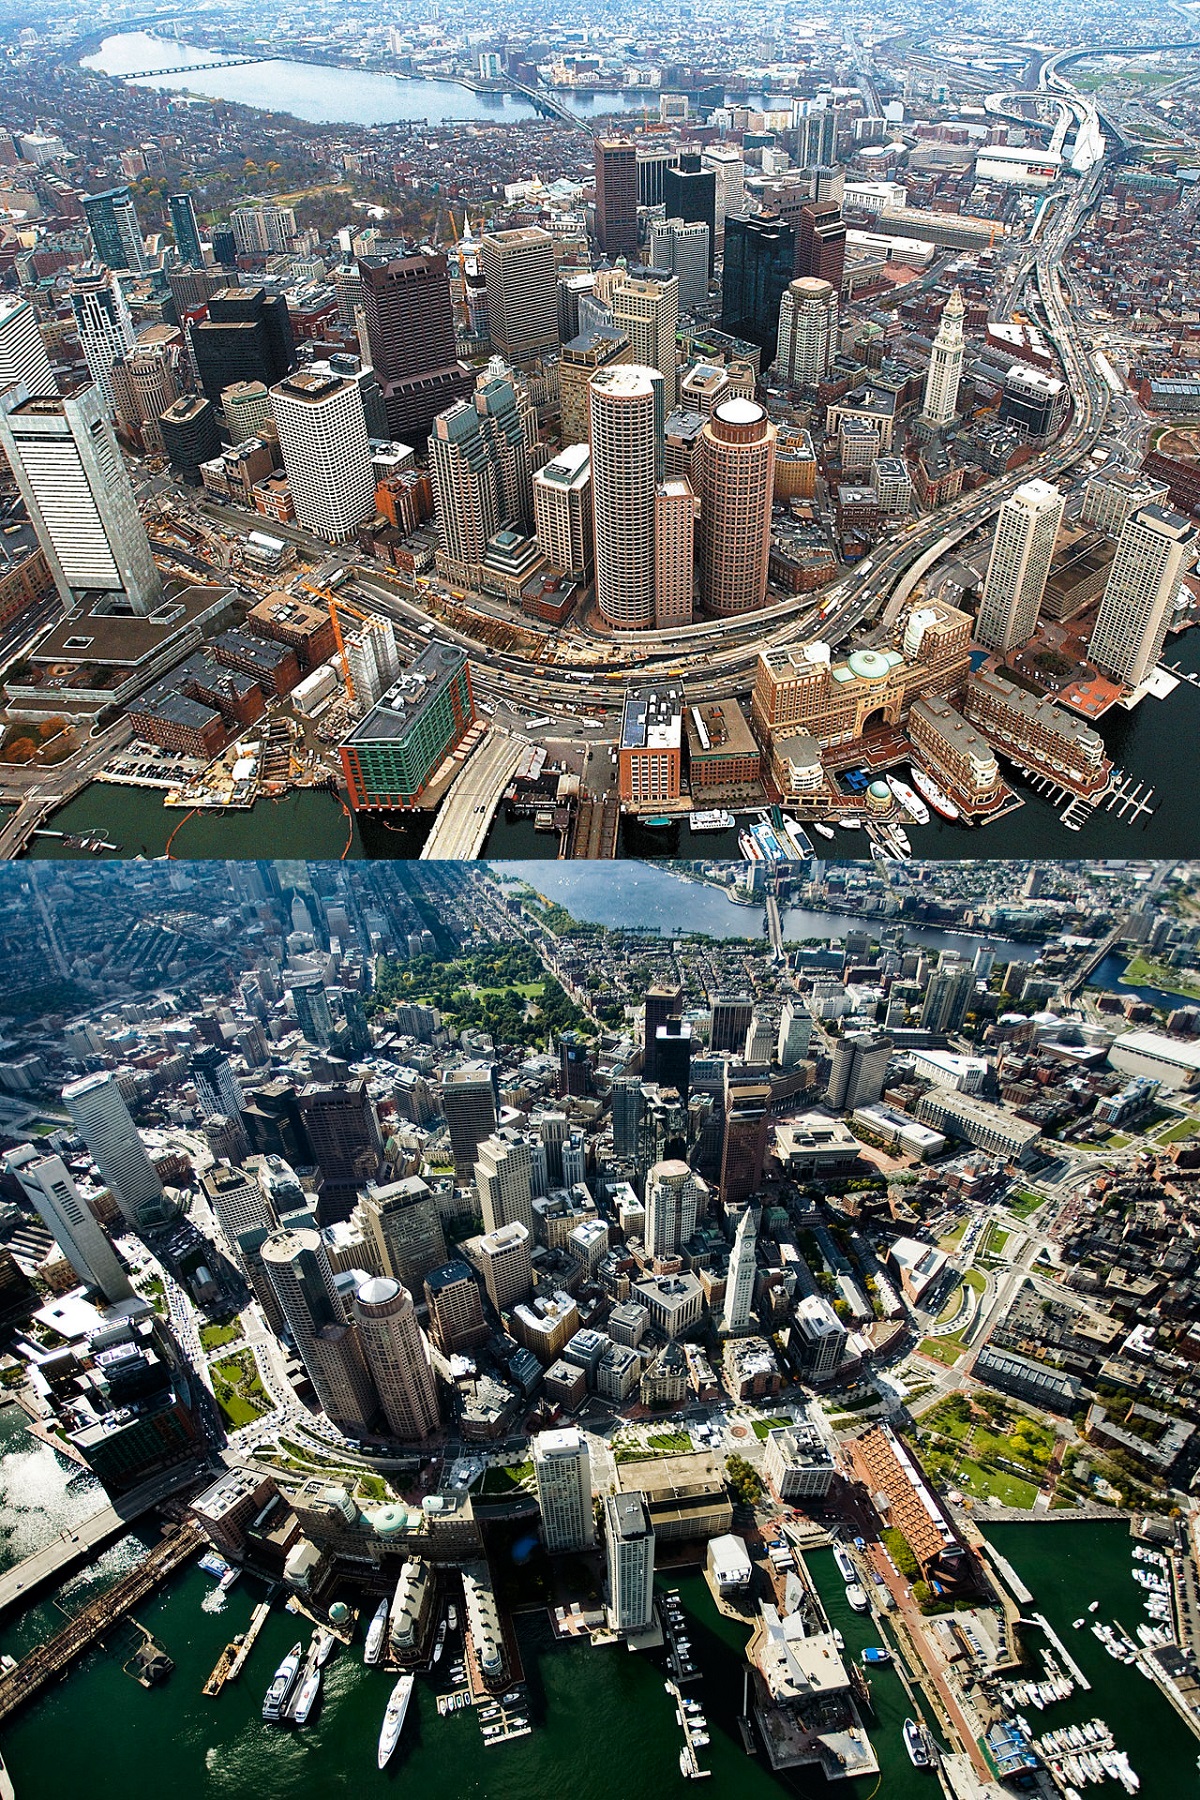 Boston - Elevated Highway Moved Underground, Replaced With Green Space. (1990s Vs. The 2010s)